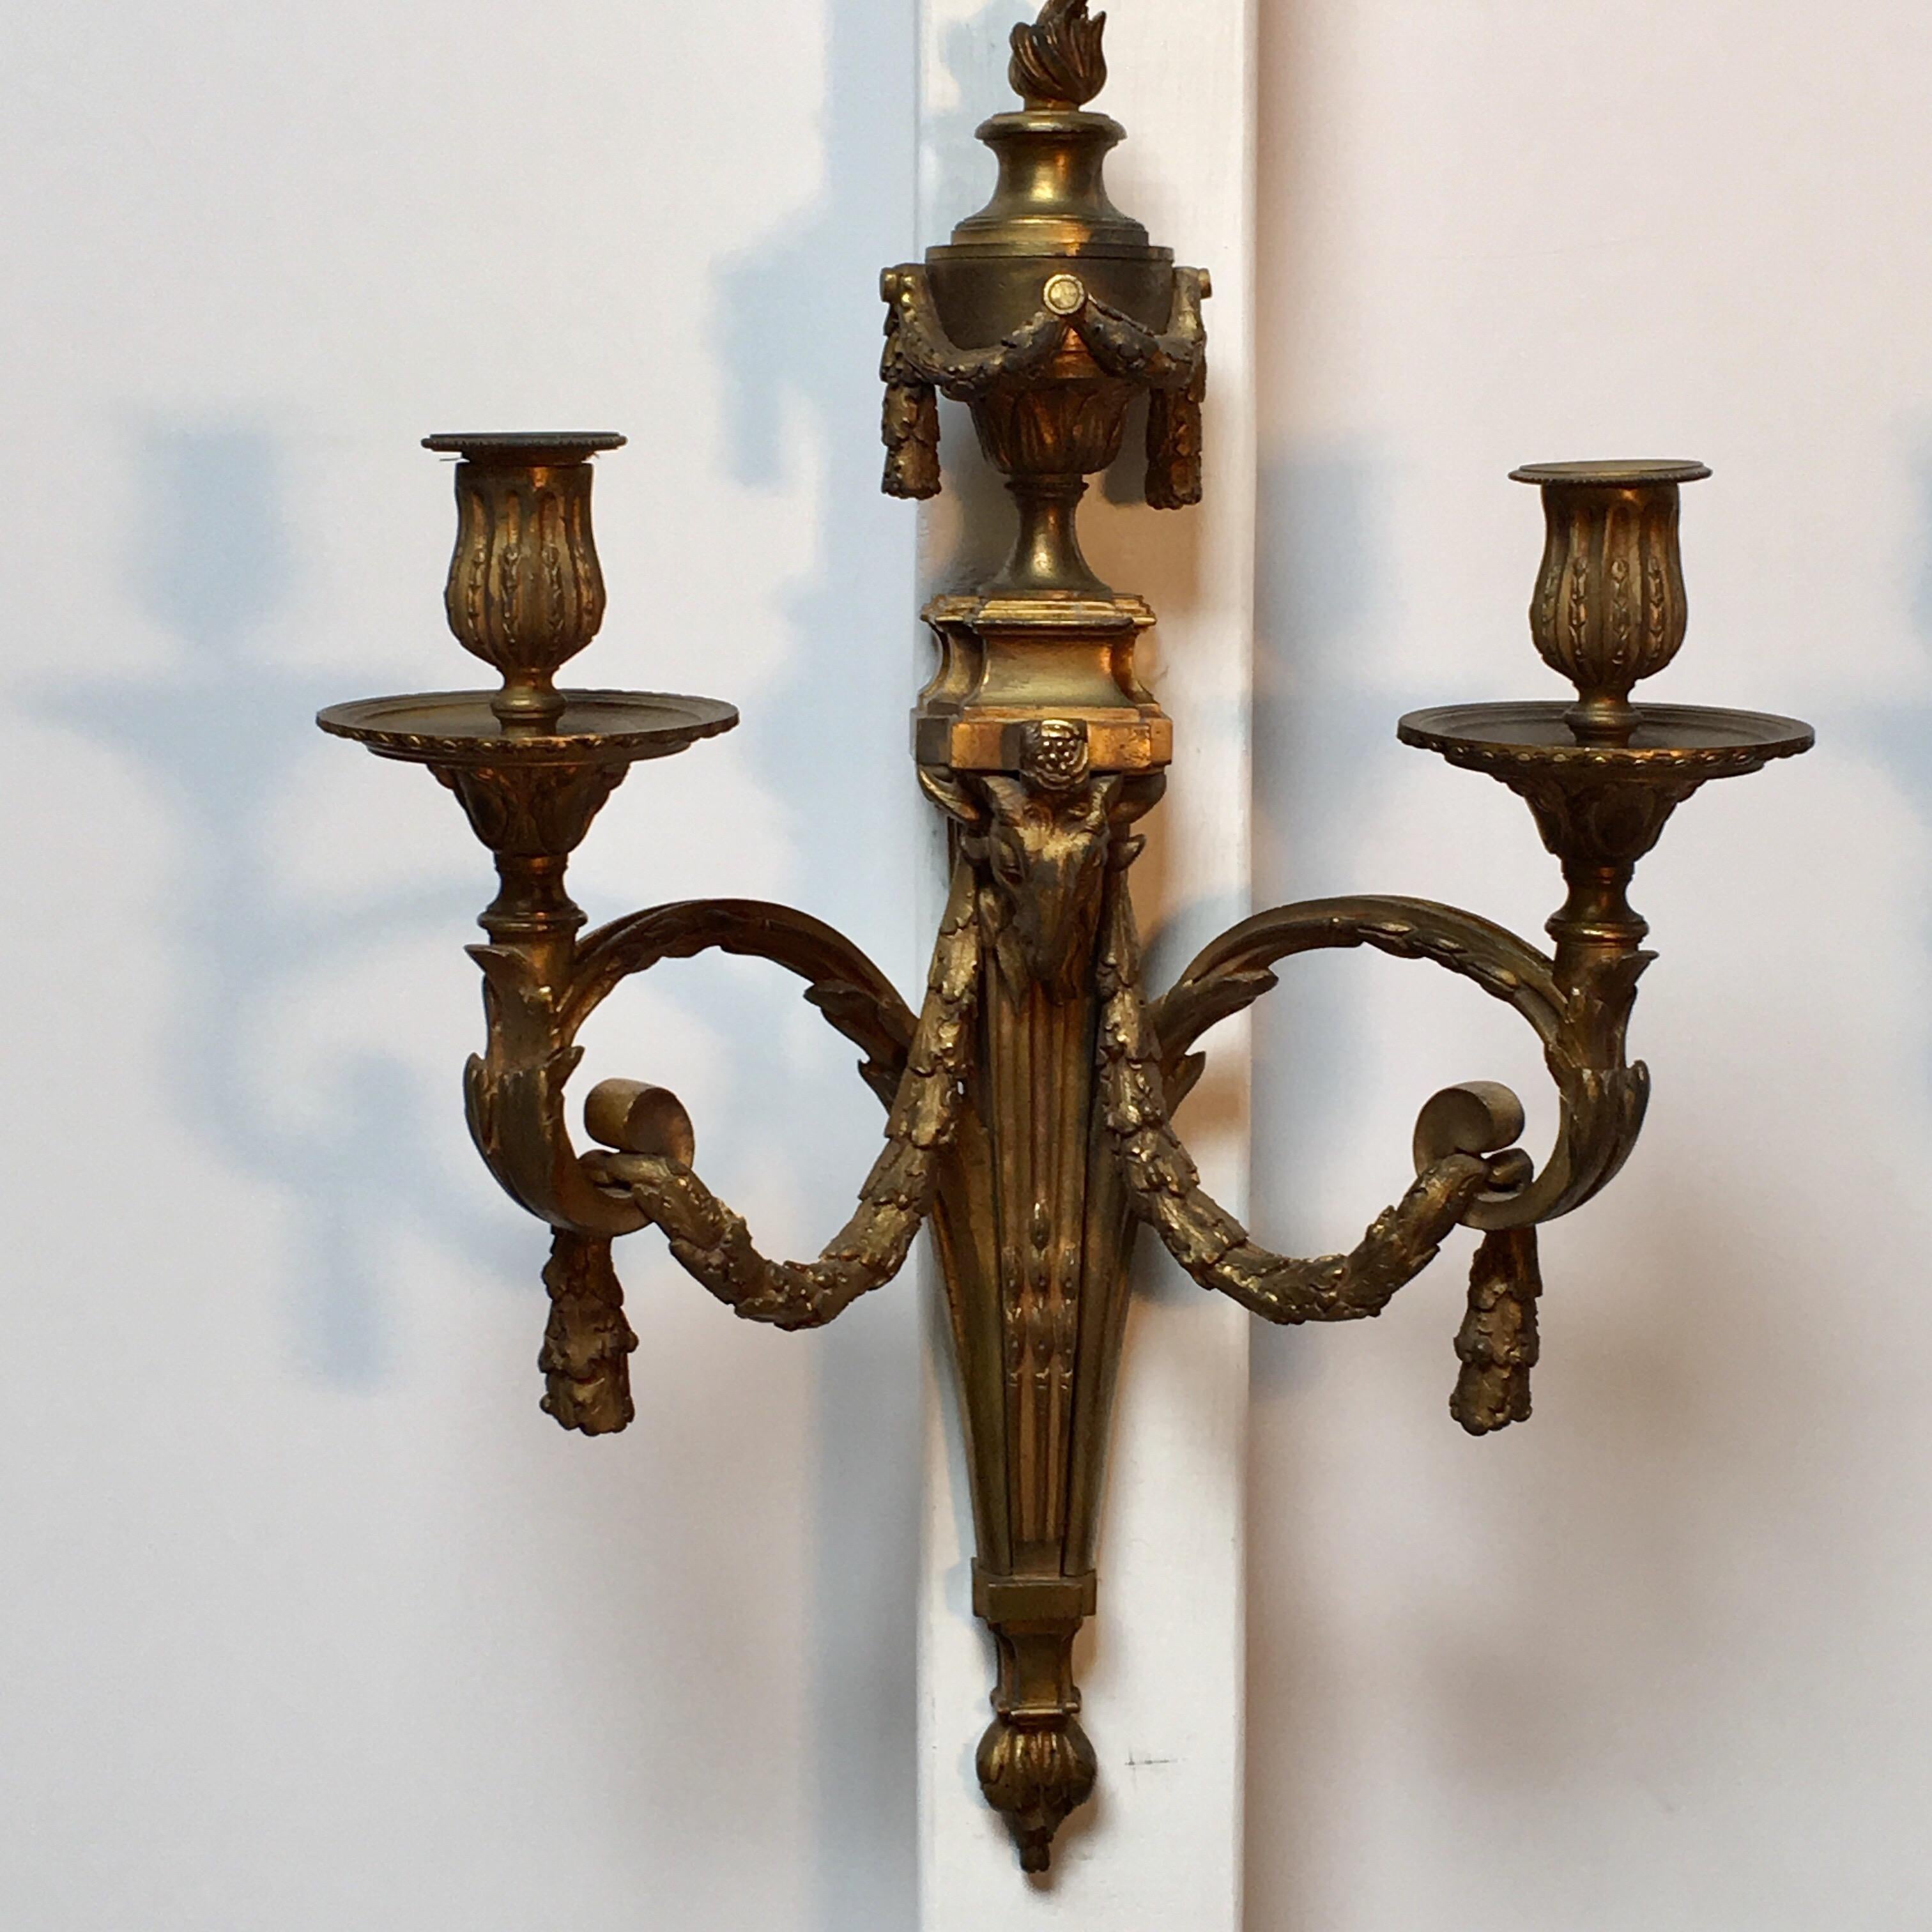 A pair of large French bronze two-arm Louis XVI style wall sconces.